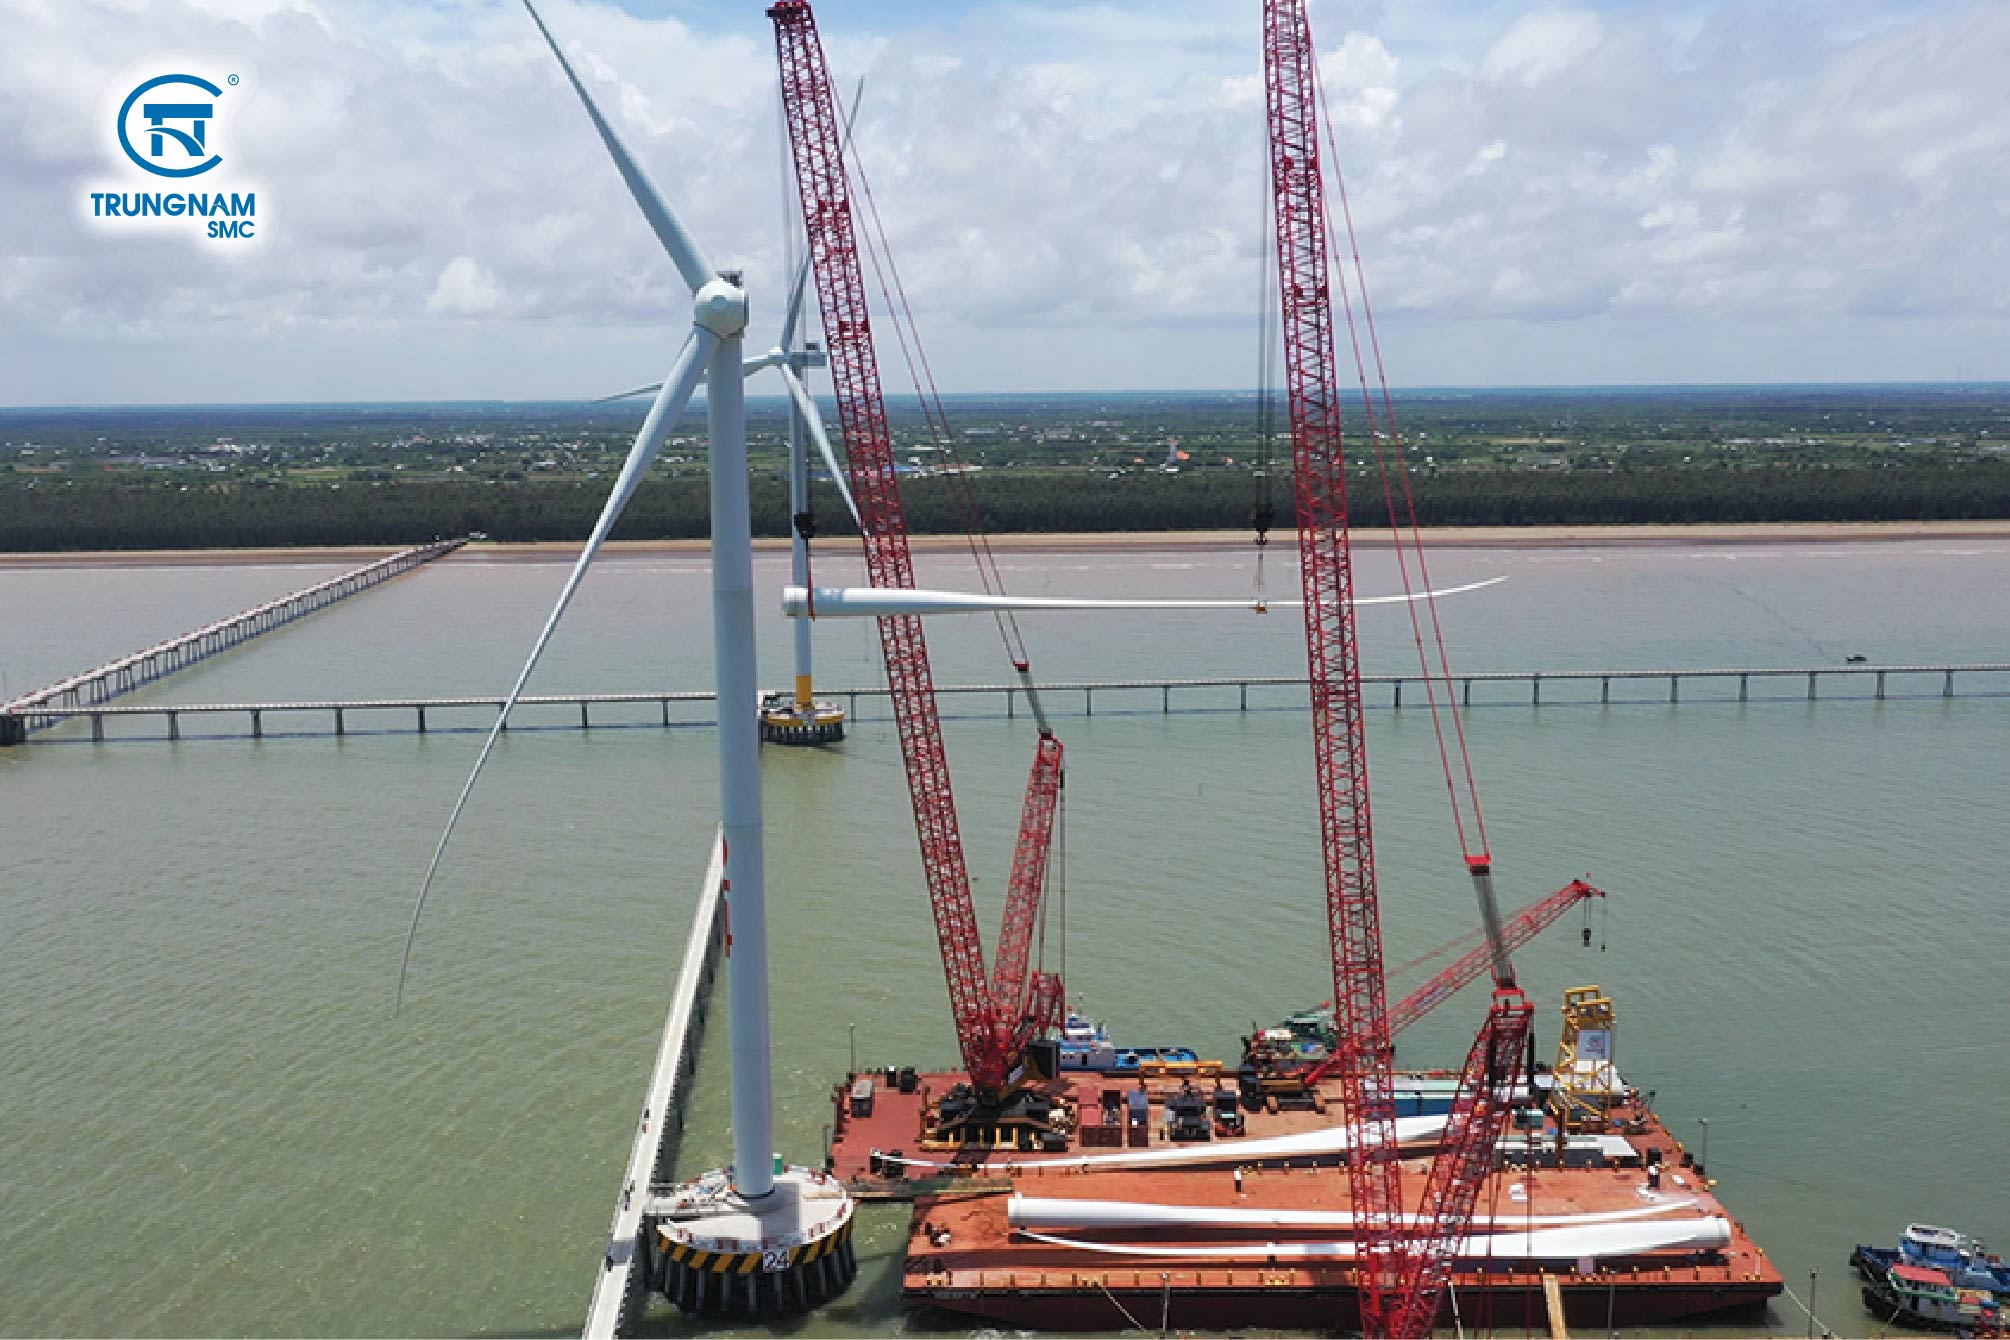 Repair and replacement of wind turbine blades at sea